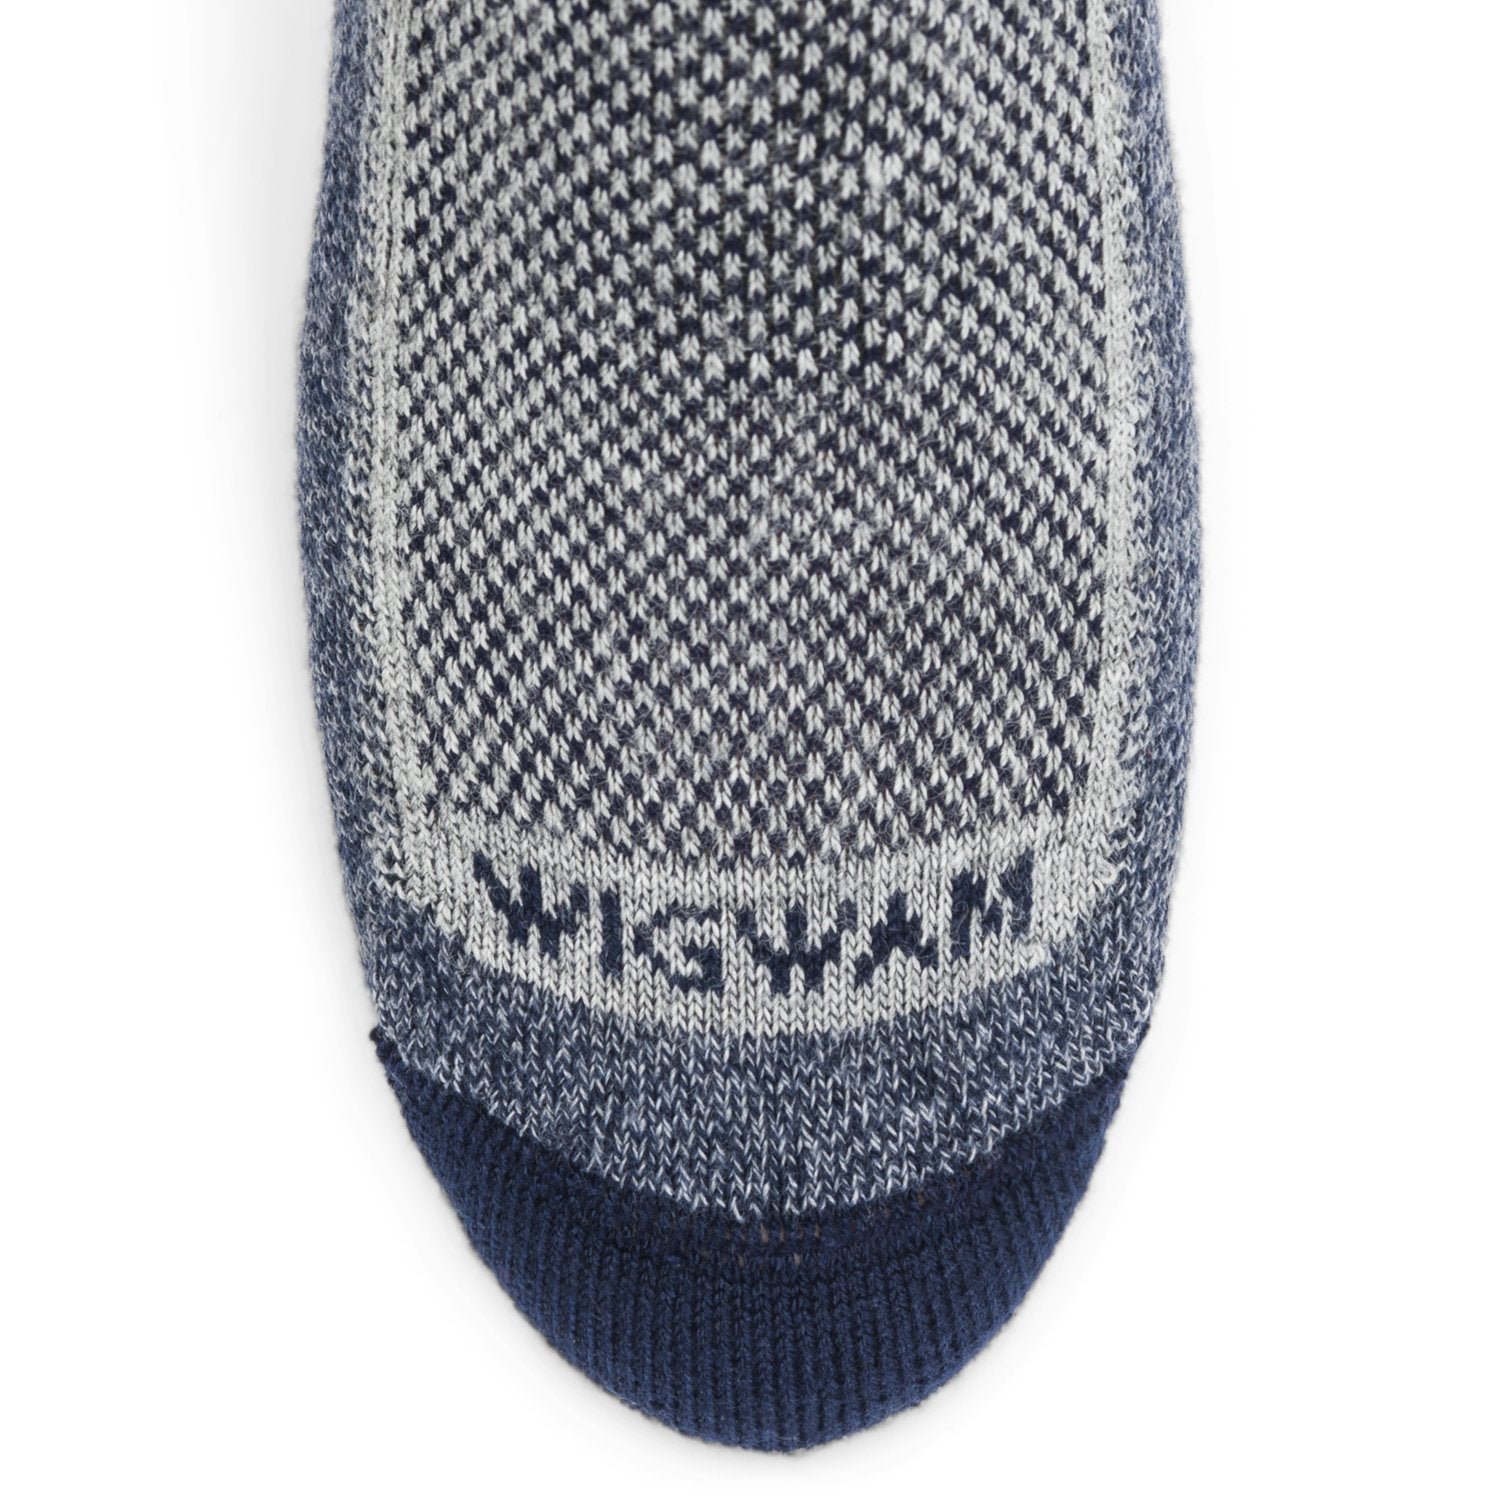 Cool-Lite Hiker Crew Midweight Sock - Grey/Navy toe perspective - made in The USA Wigwam Socks